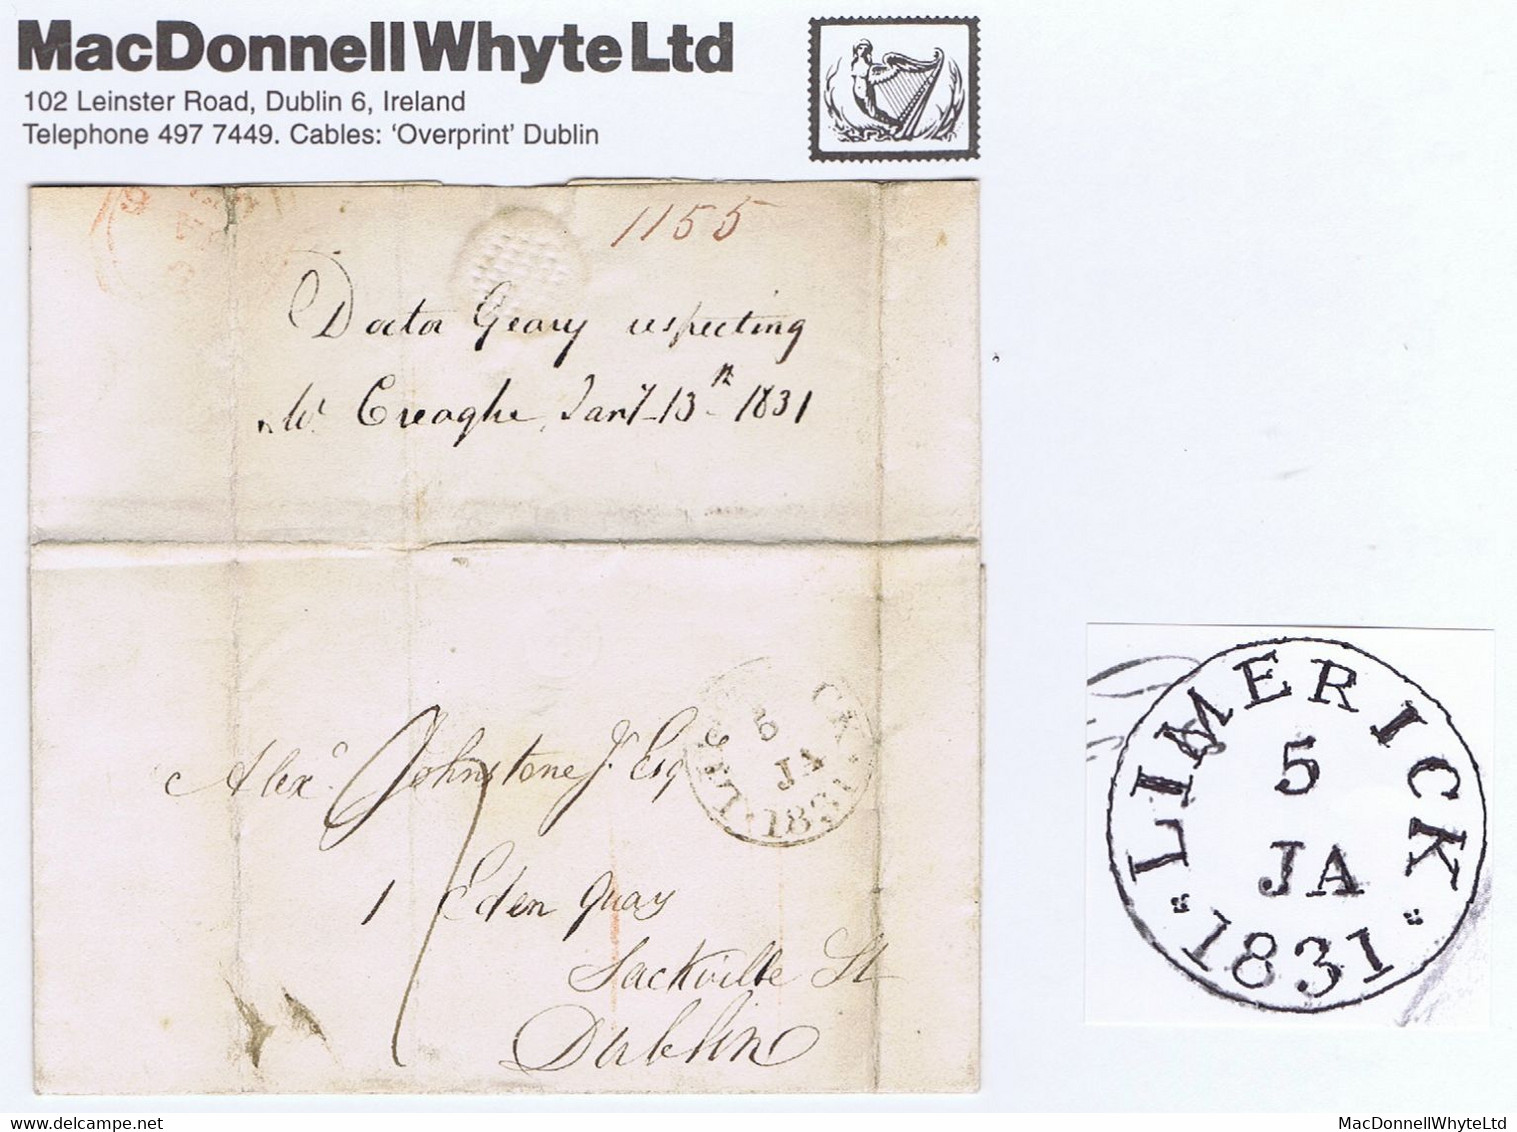 Ireland Limerick 1831 Cover To Dublin Rated "9" Ninepence For 65 To 95 Miles, Experimental LIMERICK/1831 Cds - Prefilatelia